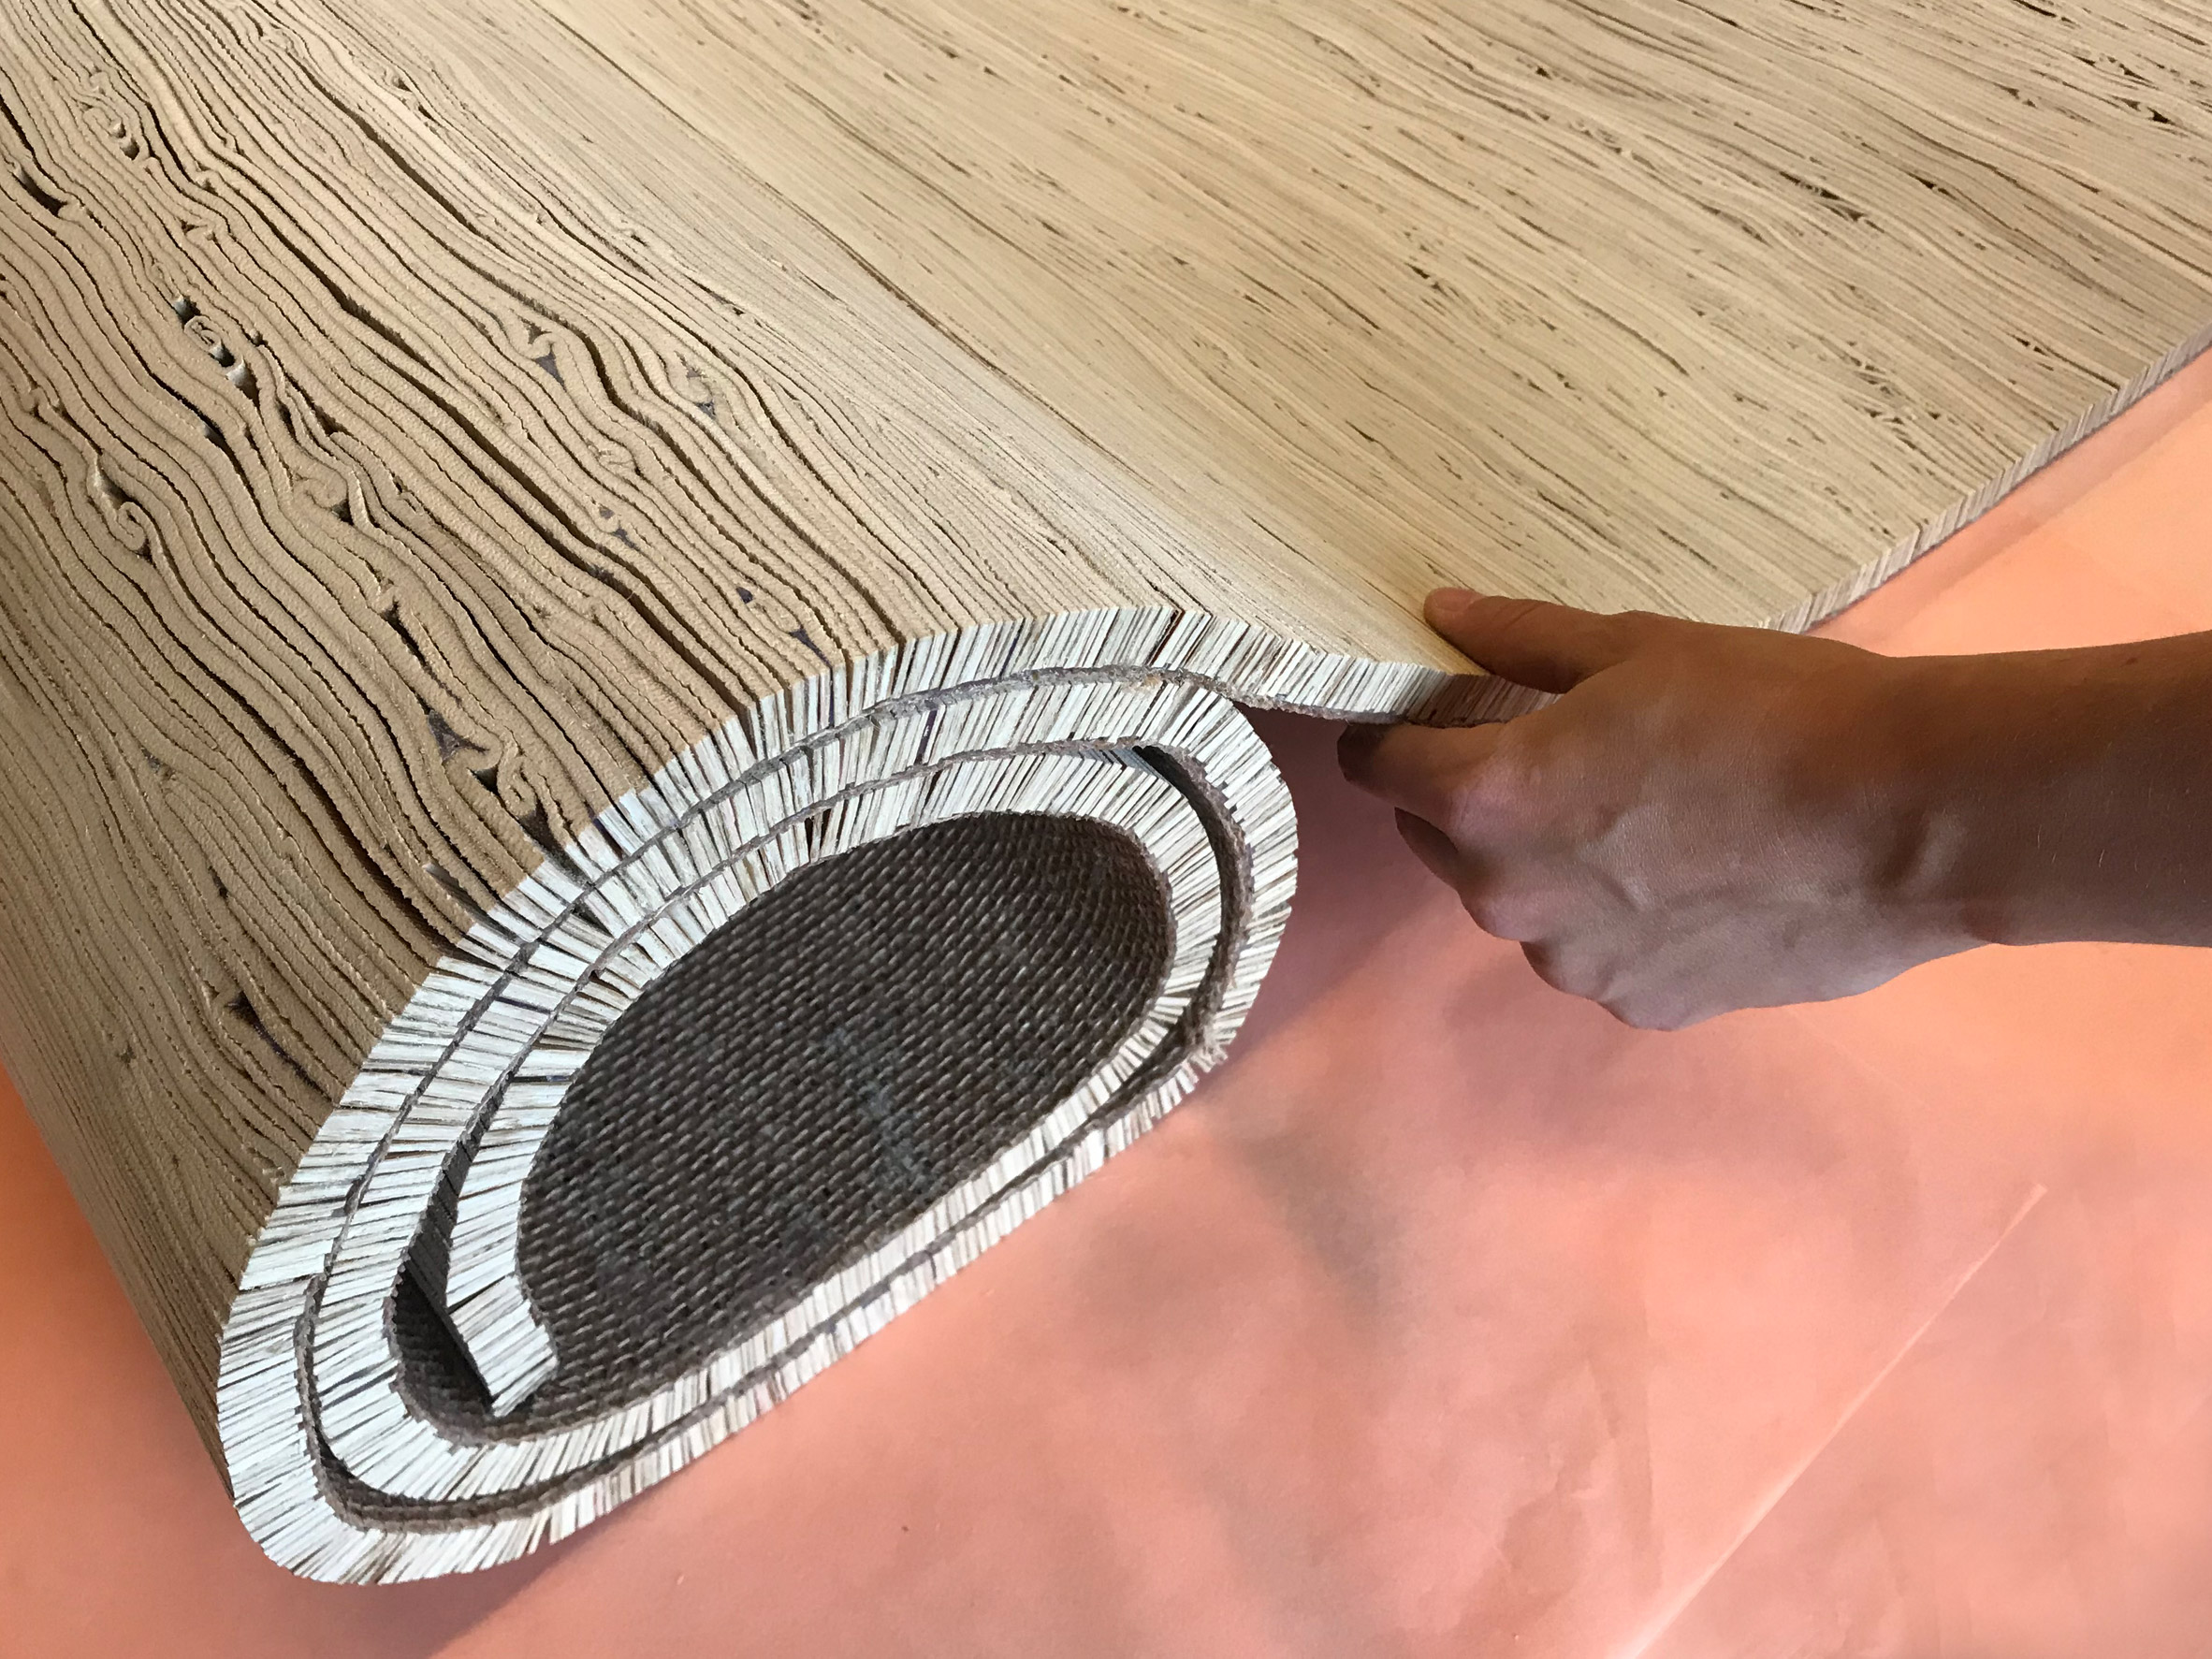 Palm leather rugs are vegan alternative to cow hide